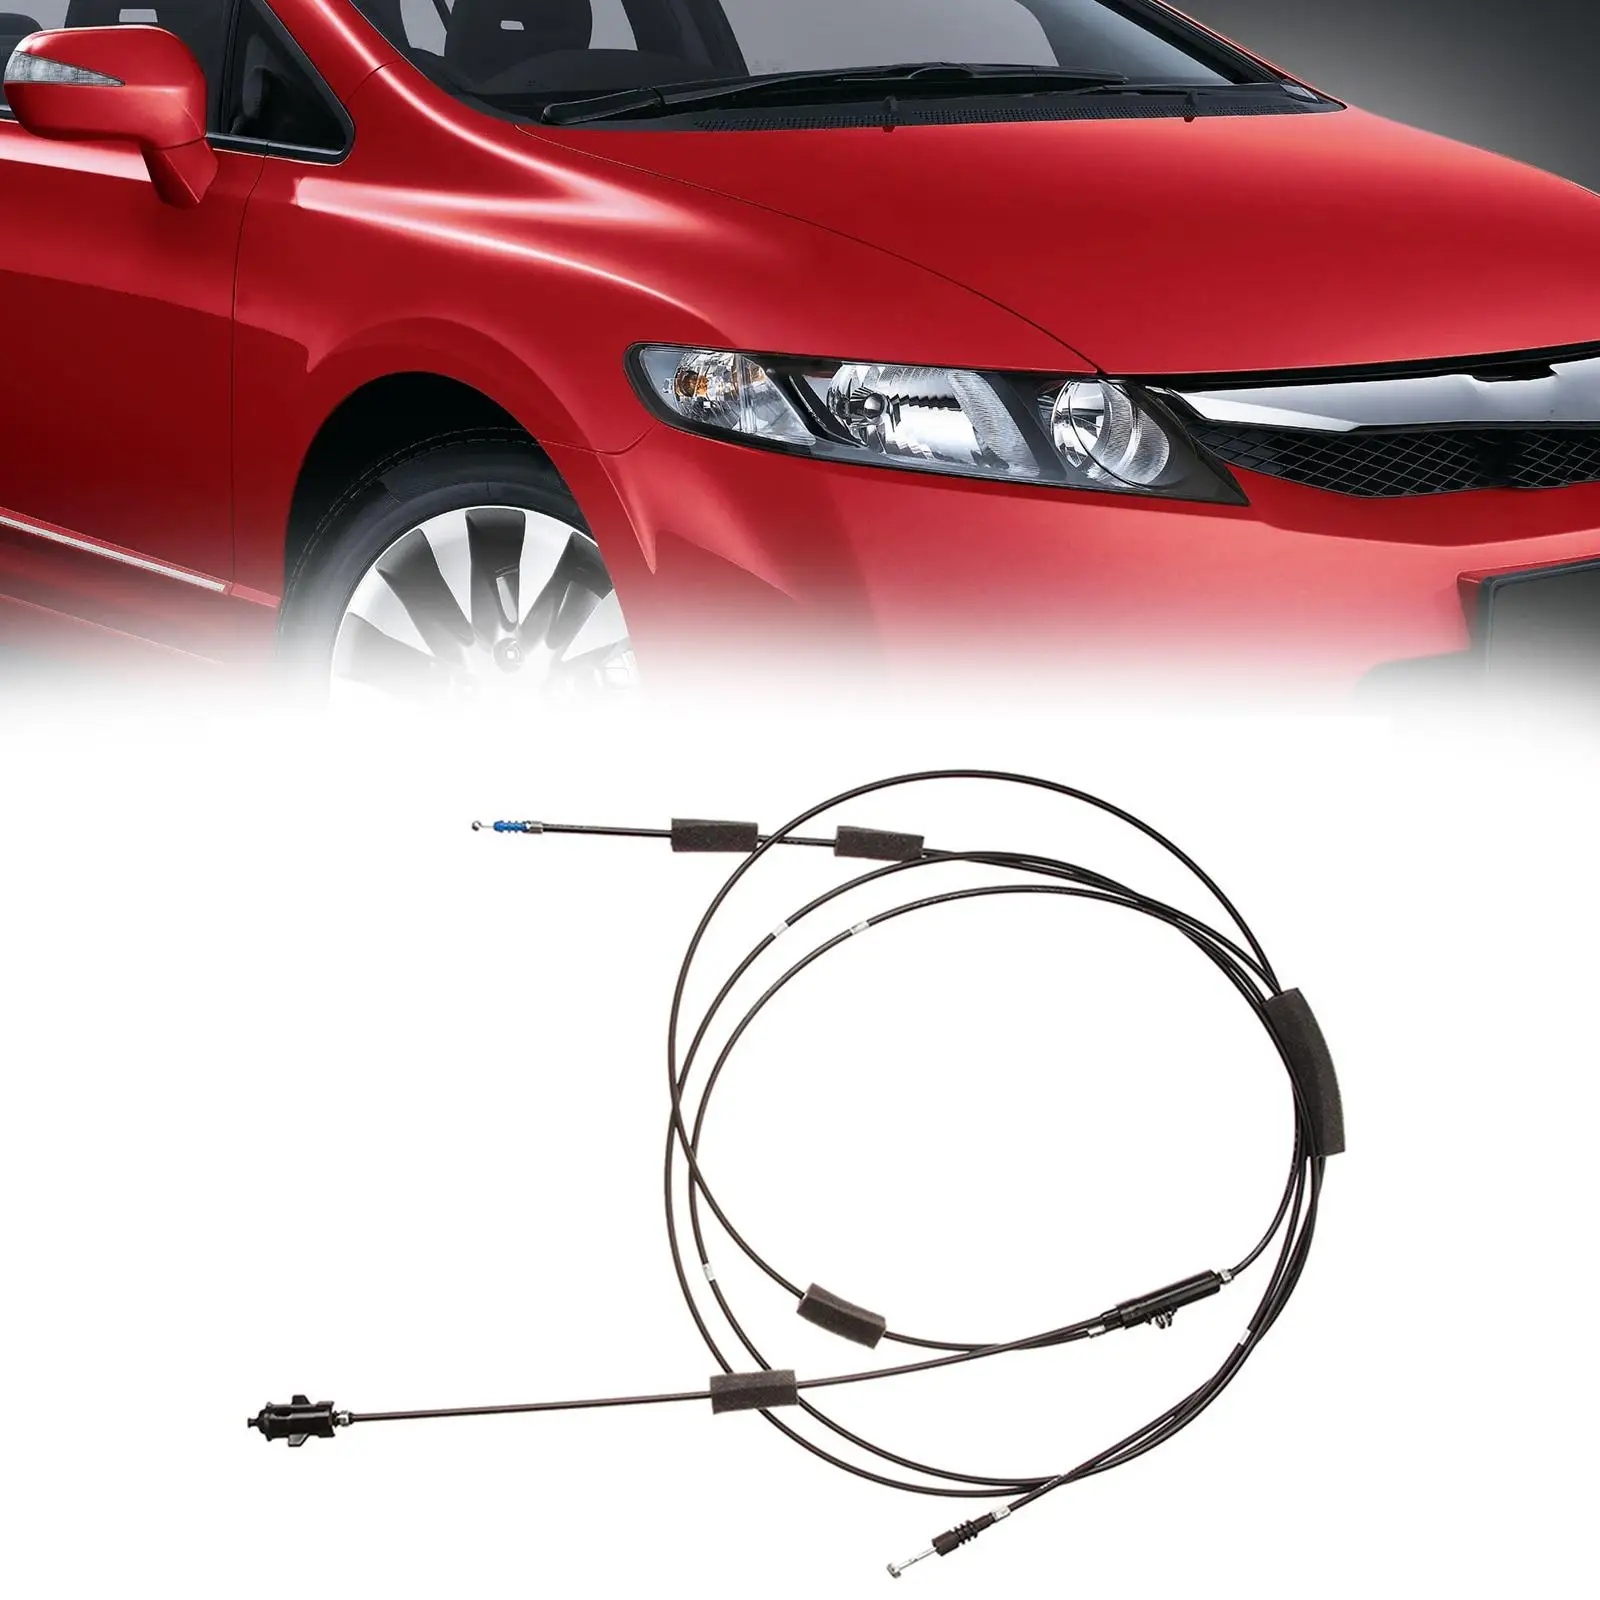 Trunk and Fuel Lid Opener Release Cable 74880-s5A-305 Replacements for Honda Civic 2001-2005 Good performance